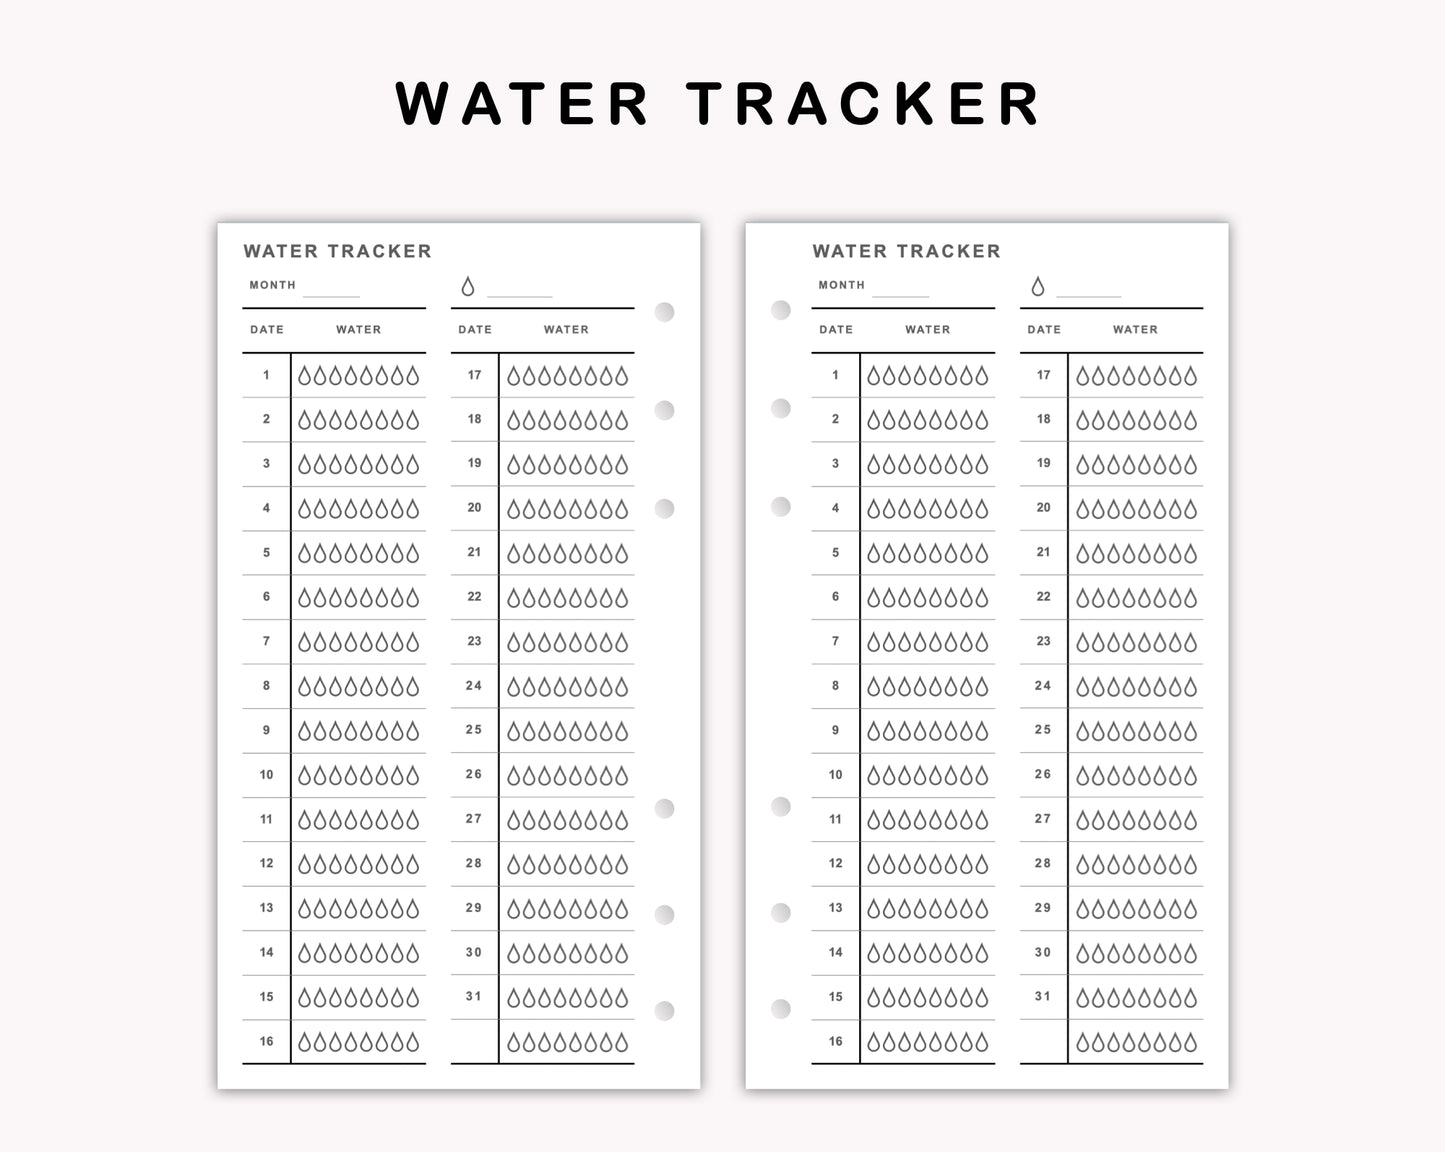 Personal Inserts - Water Tracker